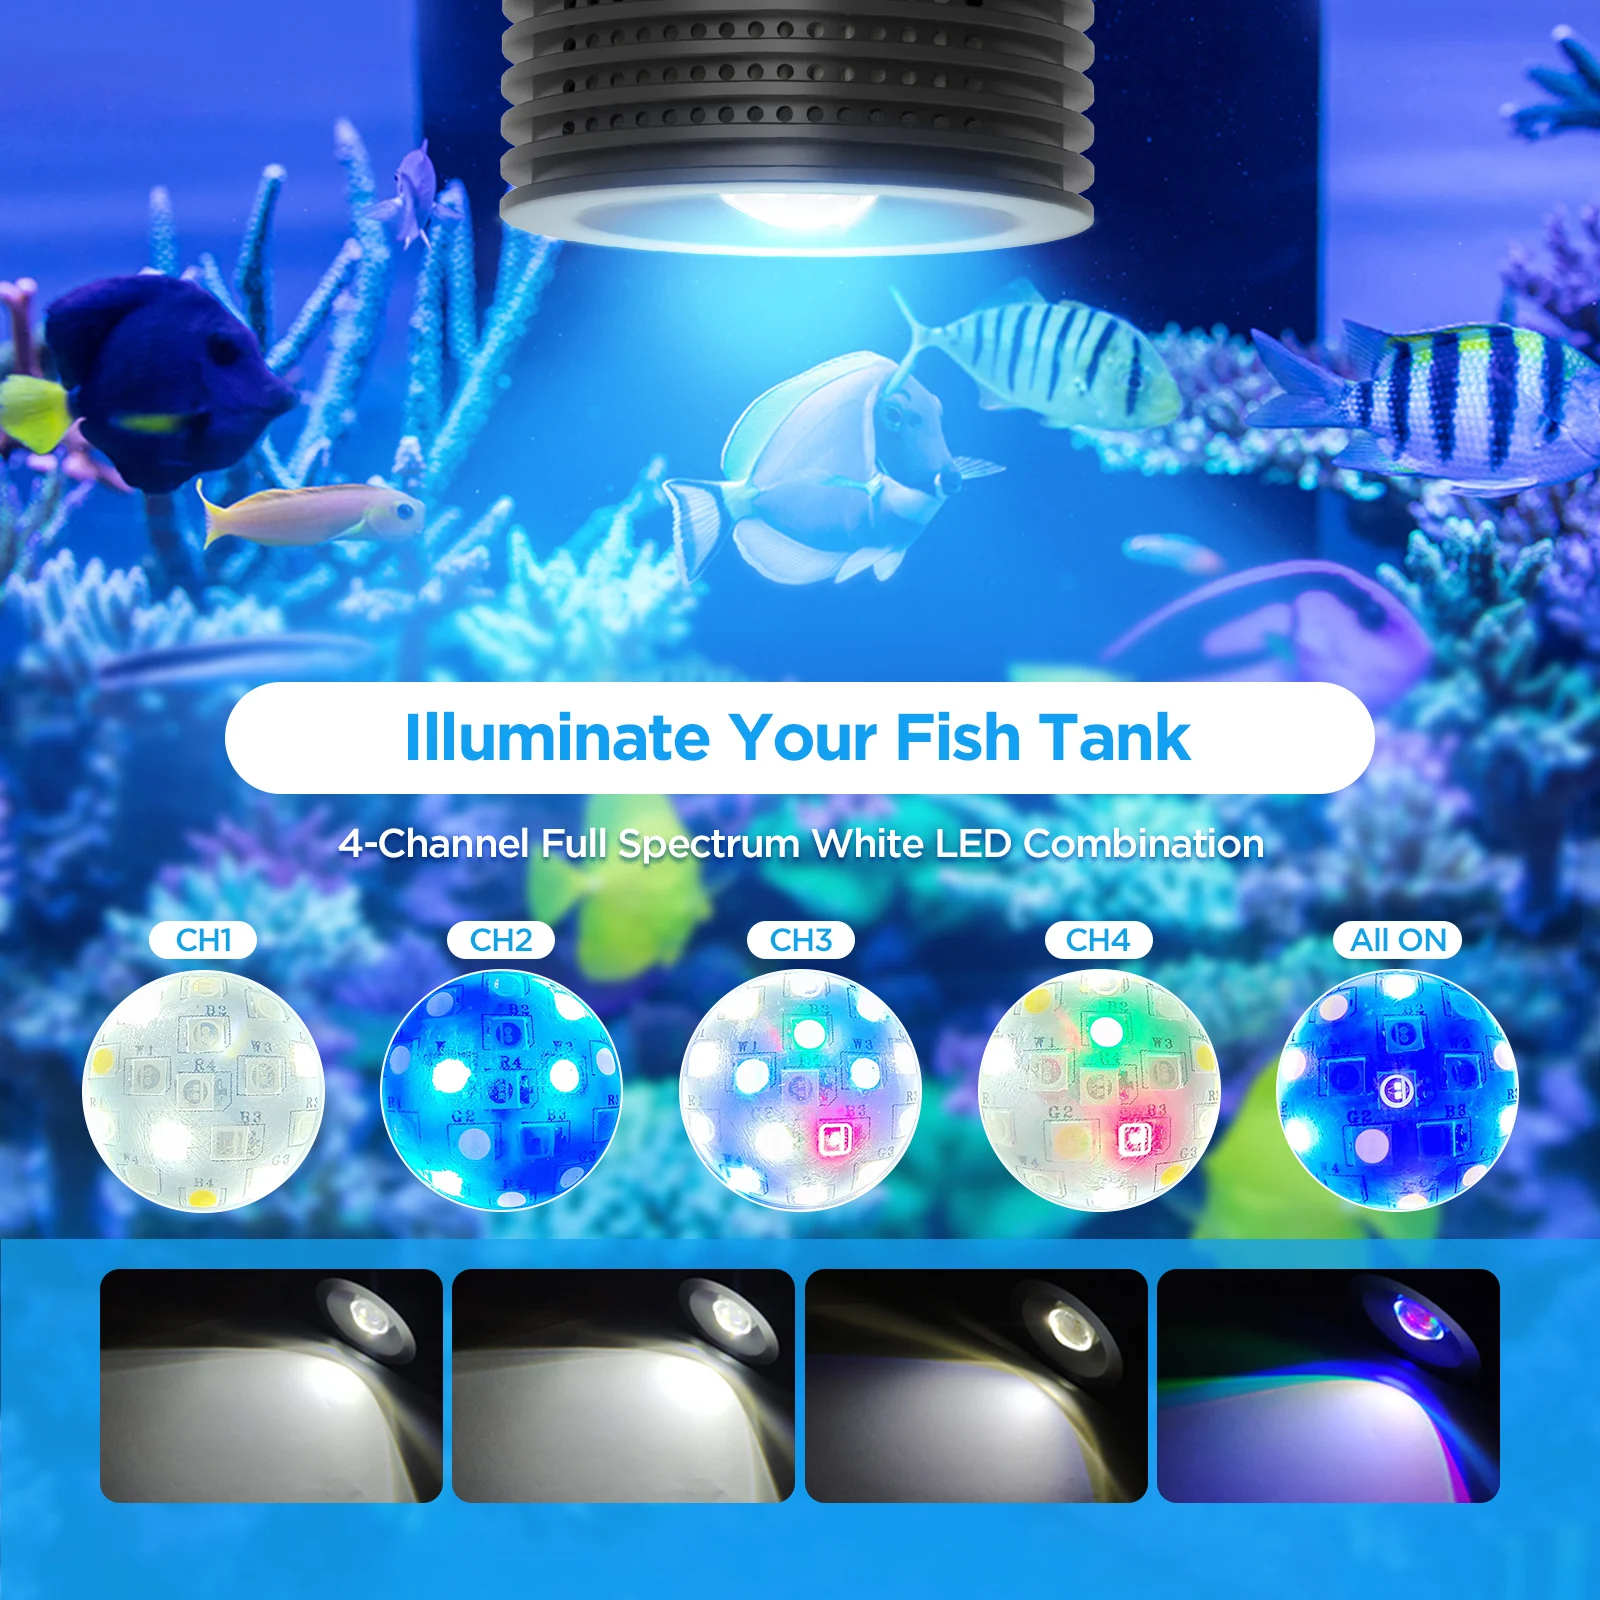 China Alpha 120 LED Aquarium Lights with WIFI controller Manufacturer and  Supplier